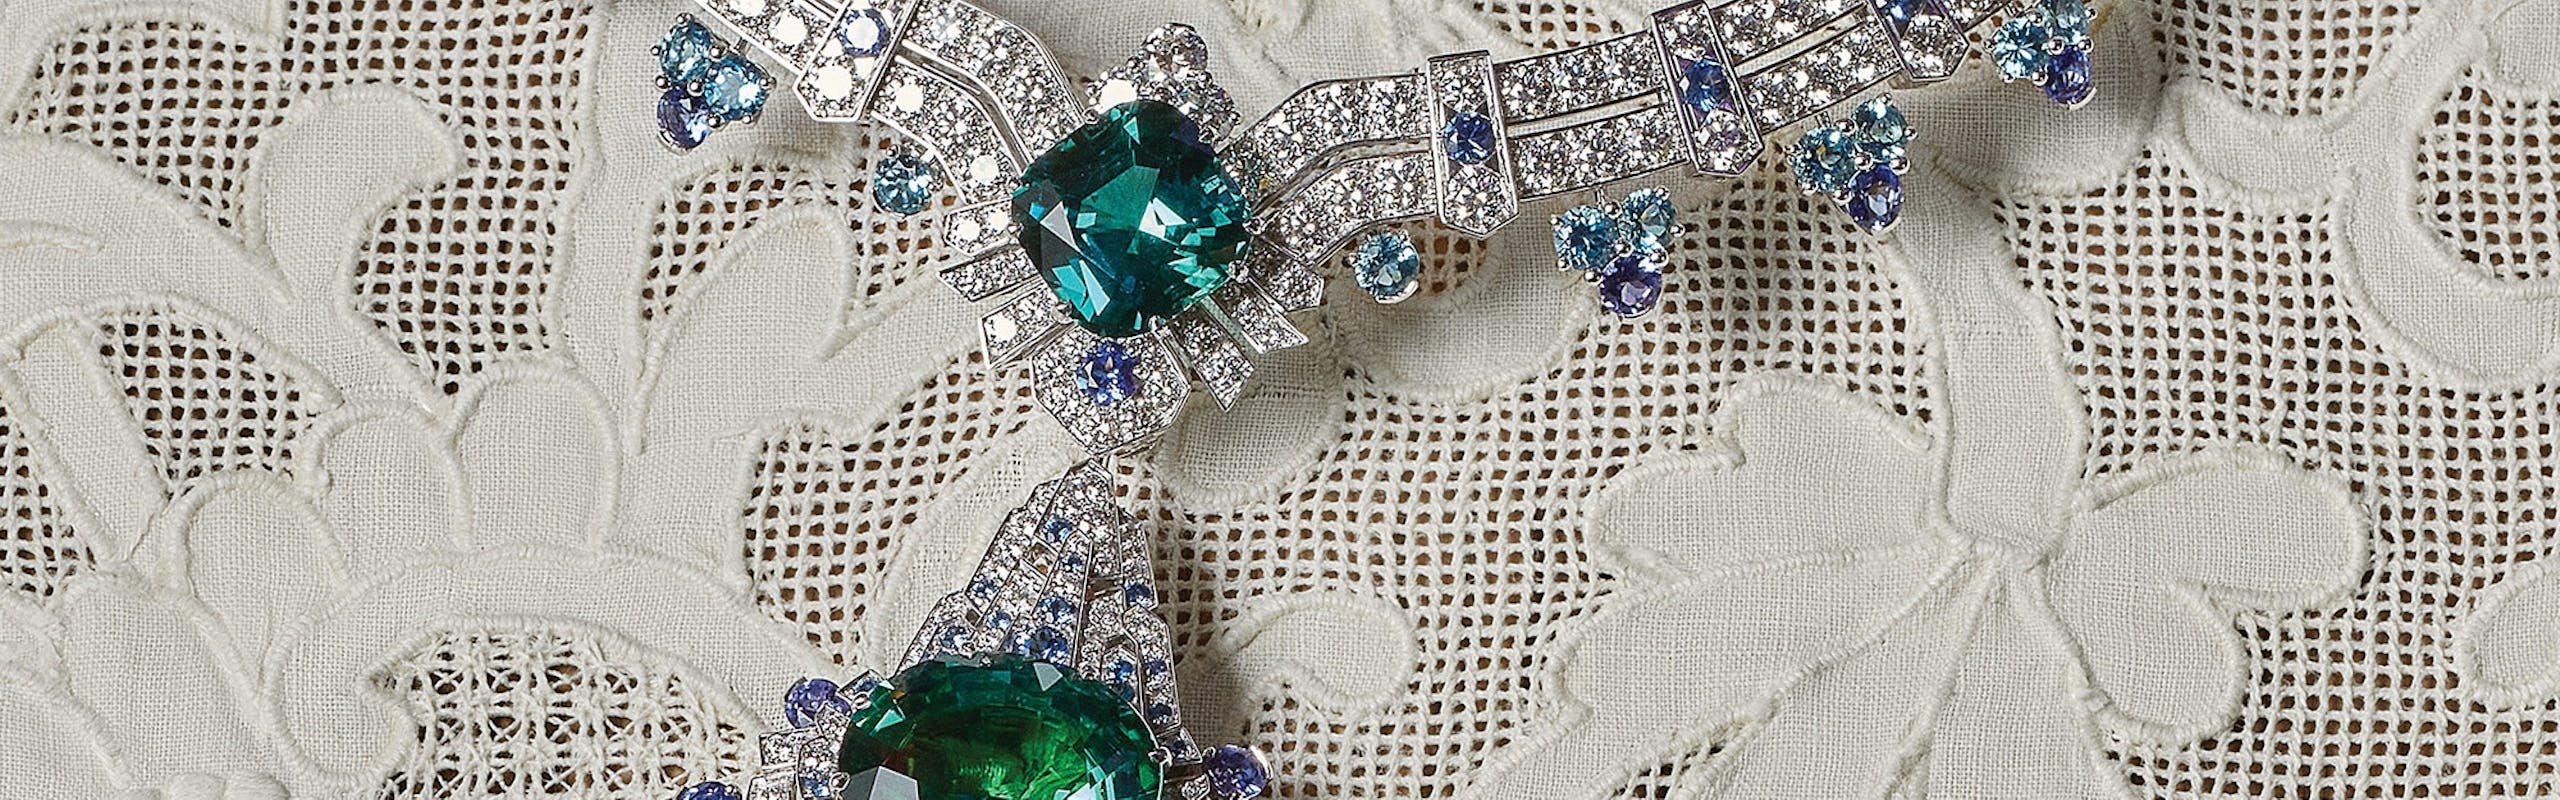 an emerald necklace with diamonds atop a lace cloth on a table